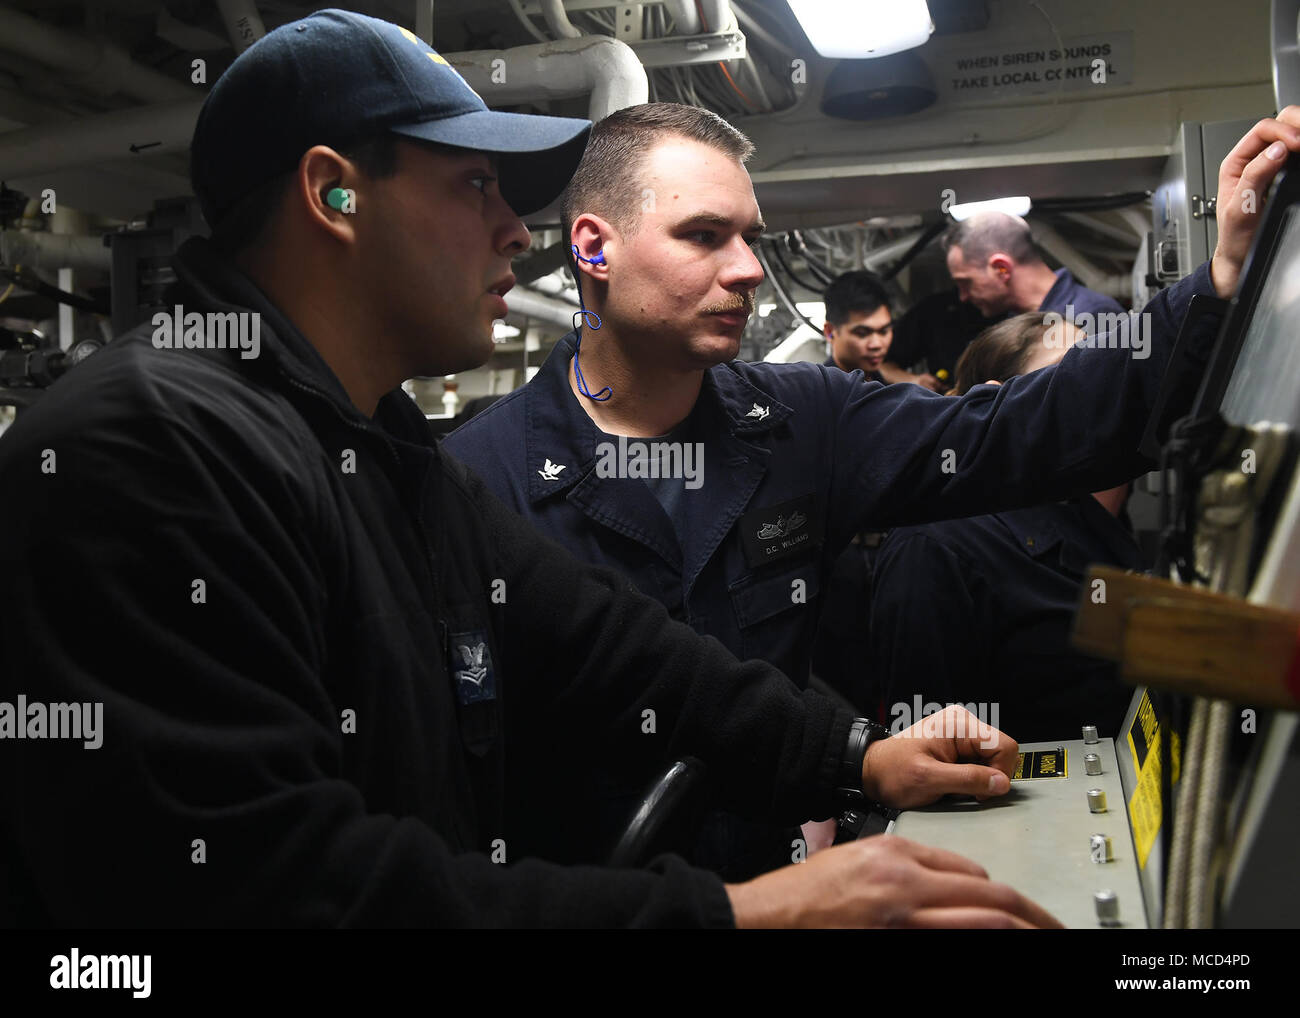 180214-N-FN963-0065 PACIFIC OCEAN (Feb. 14, 2018) Electronics Technician 2nd Class Brian Benavides, left, from Corpus Christi, Texas, and Interior Communications Electrician 3rd Class Daniel Williamson, from Jacksonville, Fla., perform system checks during an engineering drill aboard the Arleigh Burke-class guided-missile destroyer USS Sterett (DDG 104). Sterett is on a scheduled deployment to conduct operations in the Indo-Pacific region. It will also support the Wasp Expeditionary Strike Group (ESG) in order to advance U.S. Pacific Fleet’s Up-Gunned ESG concept and will train with forward-de Stock Photo